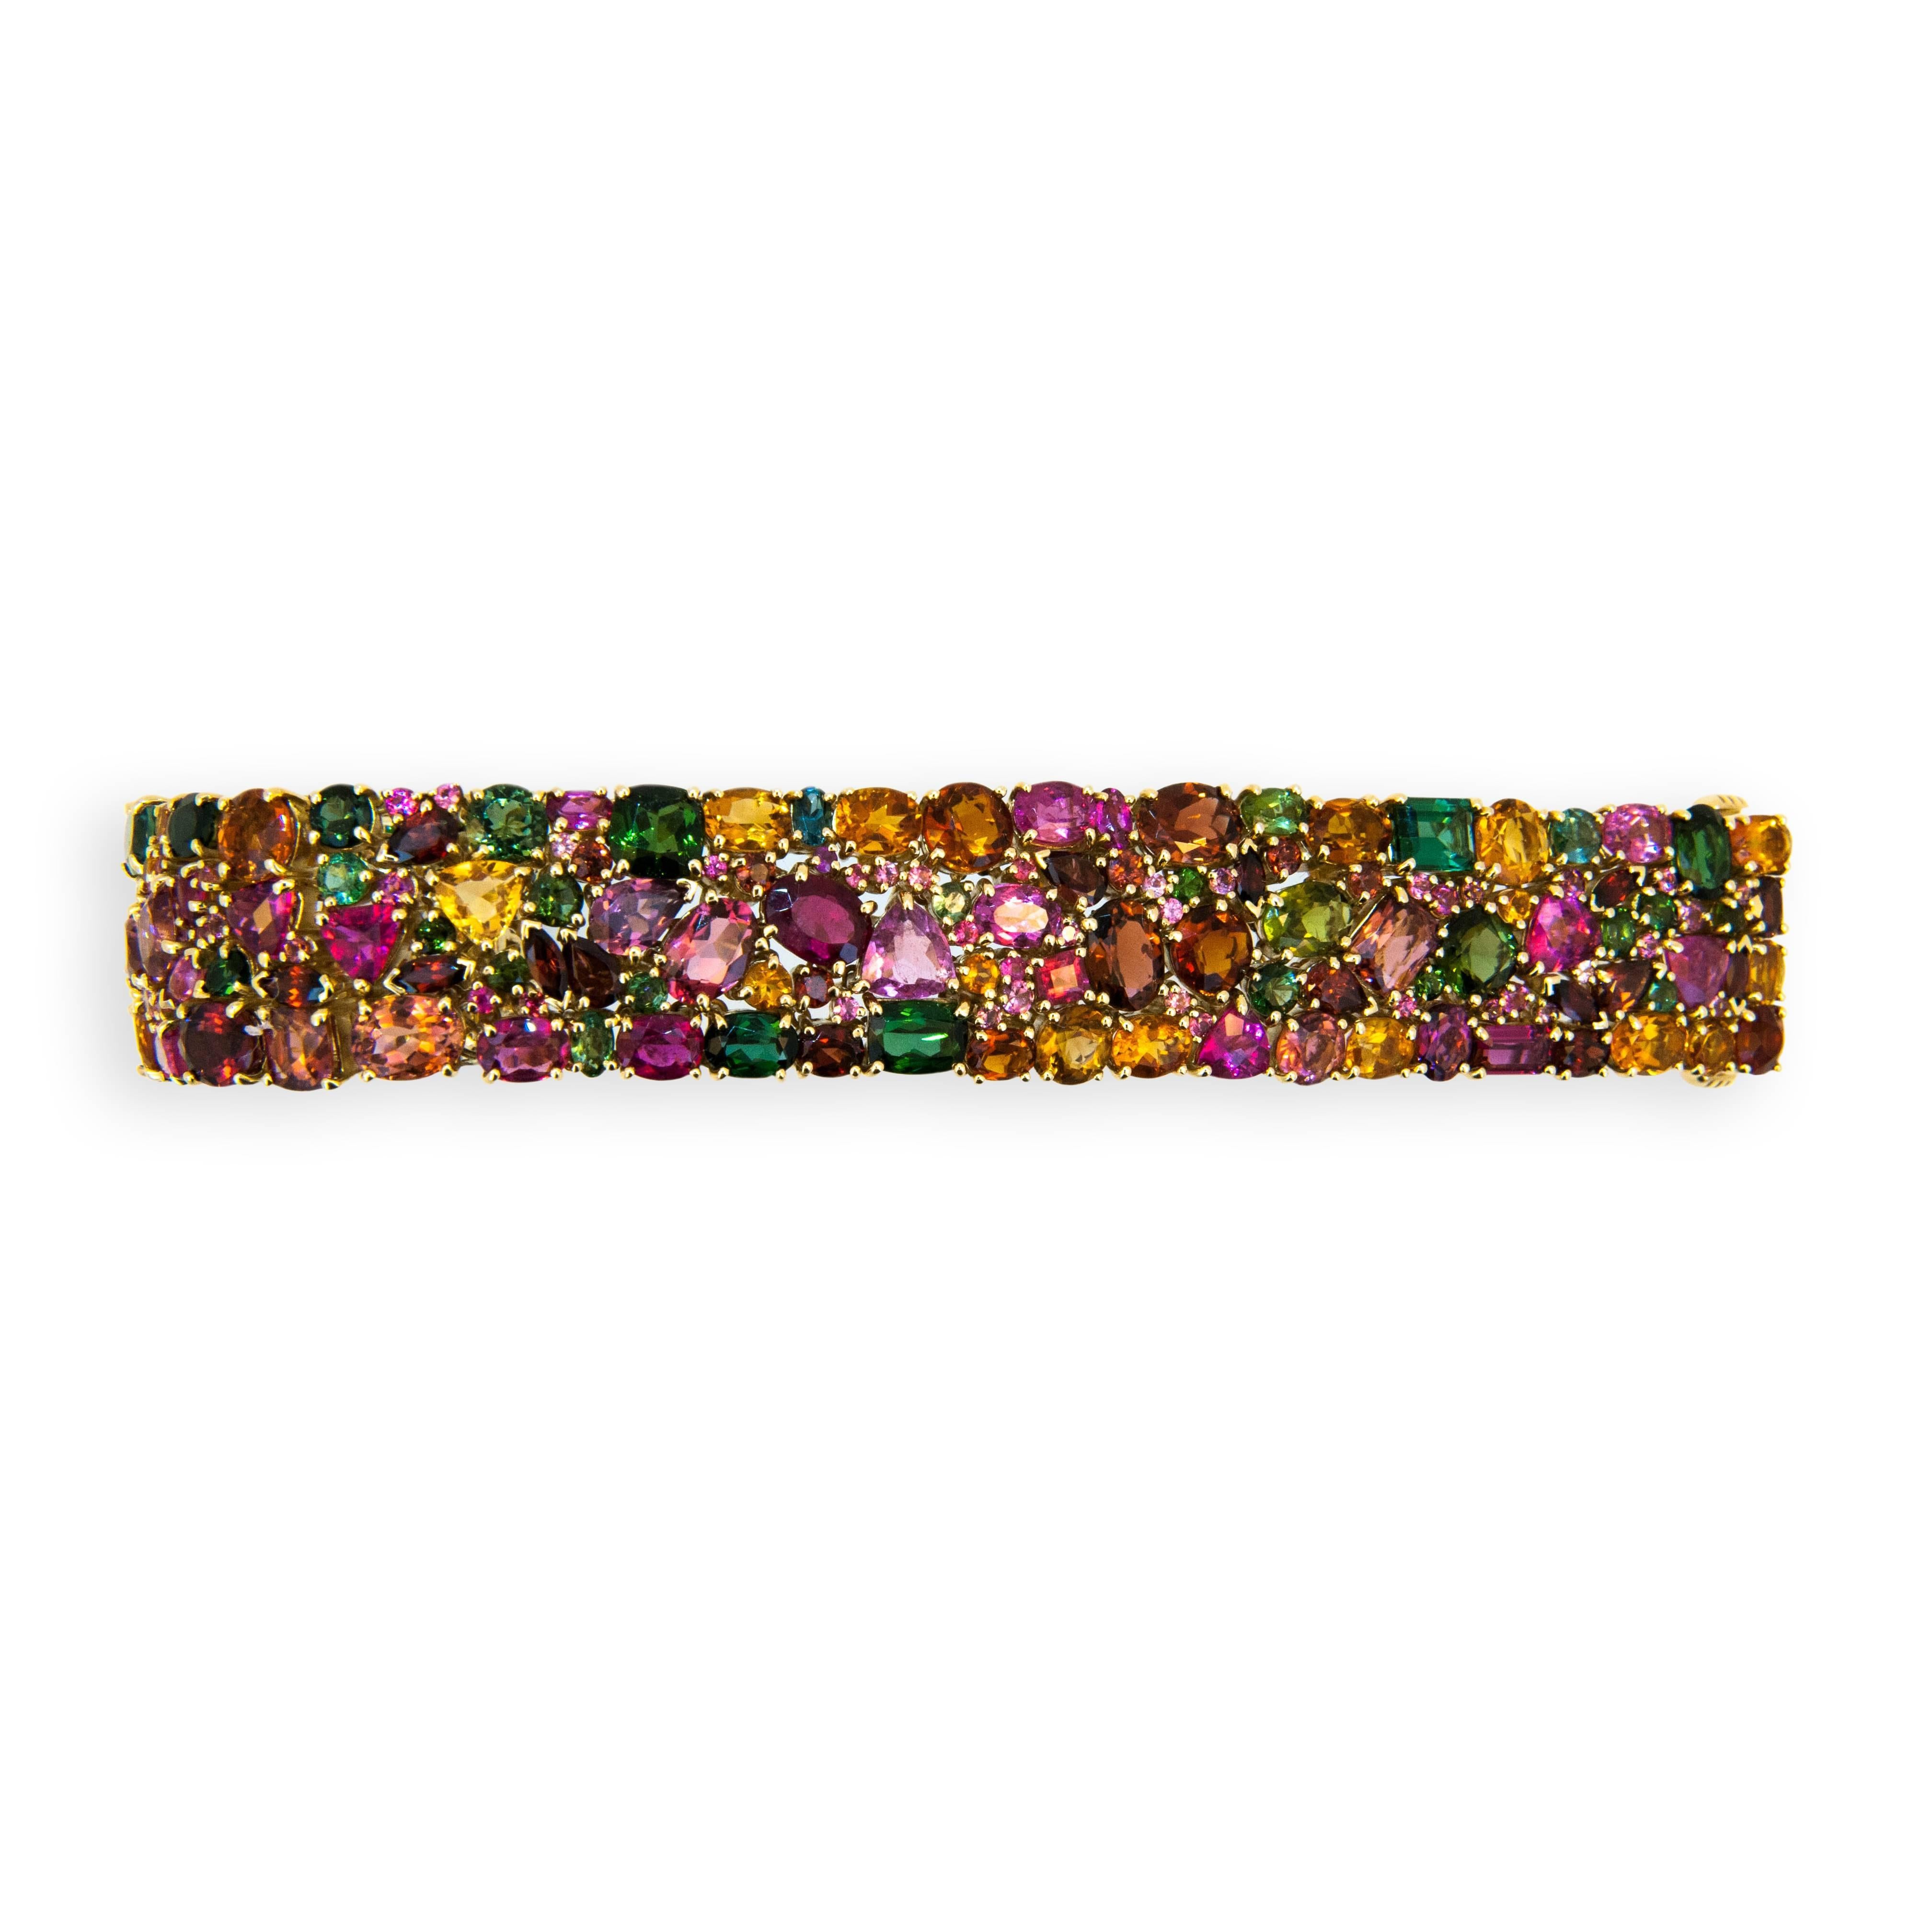 18 karat yellow gold Kaleidoscope bracelet Autumn 188 multi-colored multi-shaped Tourmaline, Garnet, Citrine, and Pink Sapphire 89.33 carats total weight. Oval,round,trillion,marquise, baguette, pear,rectangular. Slightly over 3/4 inches wide. Seven